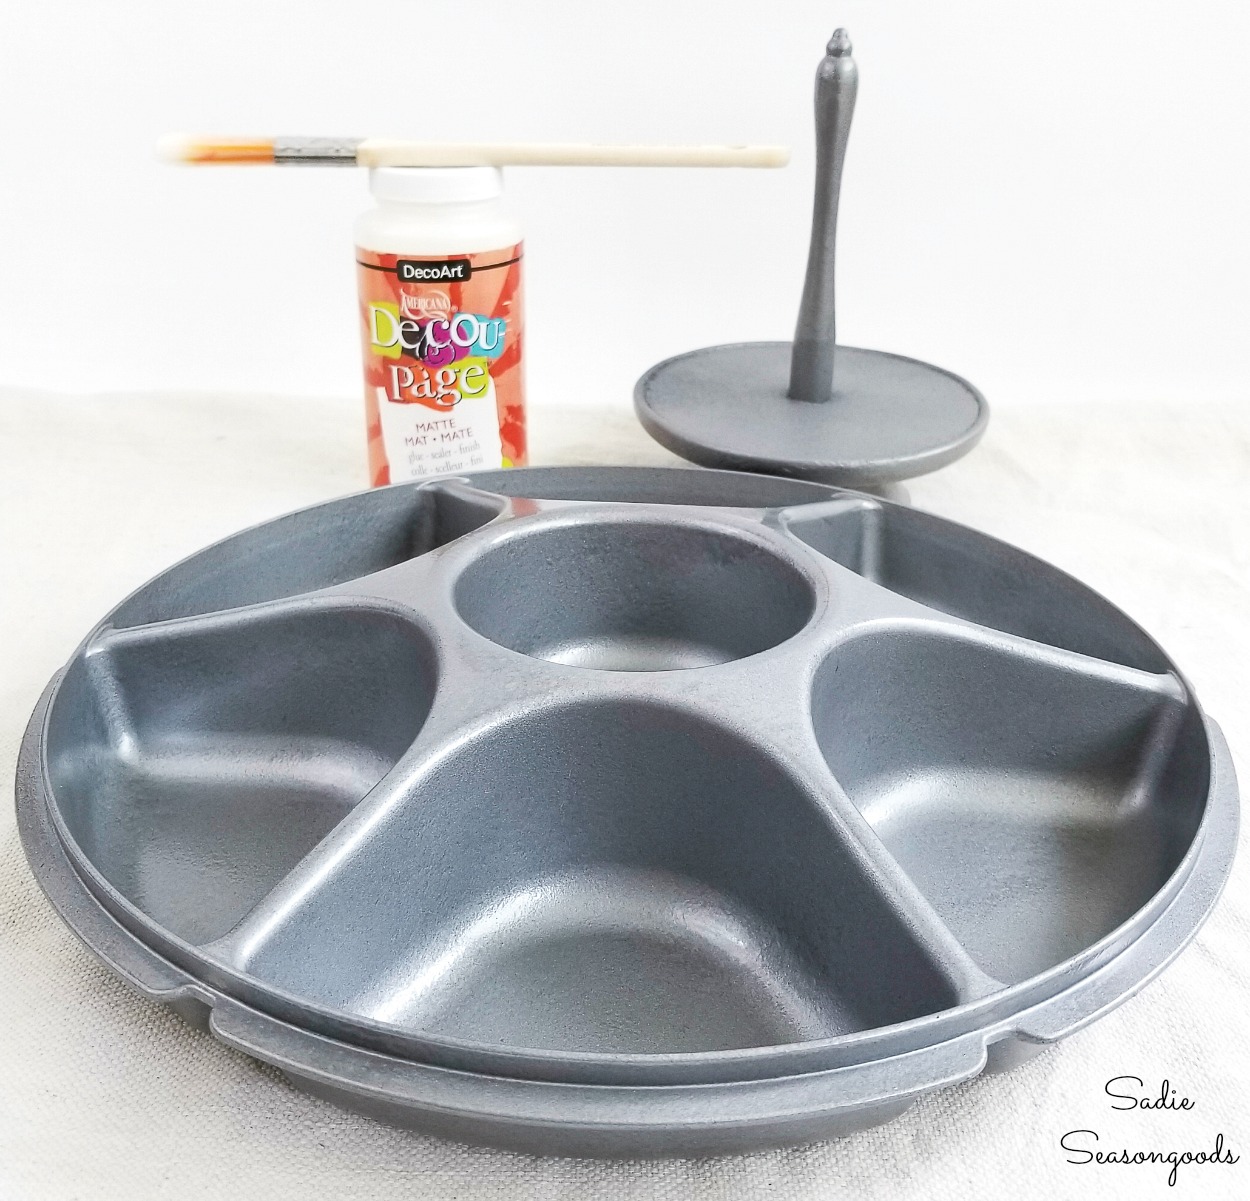 https://www.sadieseasongoods.com/wp-content/uploads/2018/06/Applying-a-flat-top-coat-to-a-small-parts-organizer-by-upcycling-a-Tupperware-veggie-tray.jpg